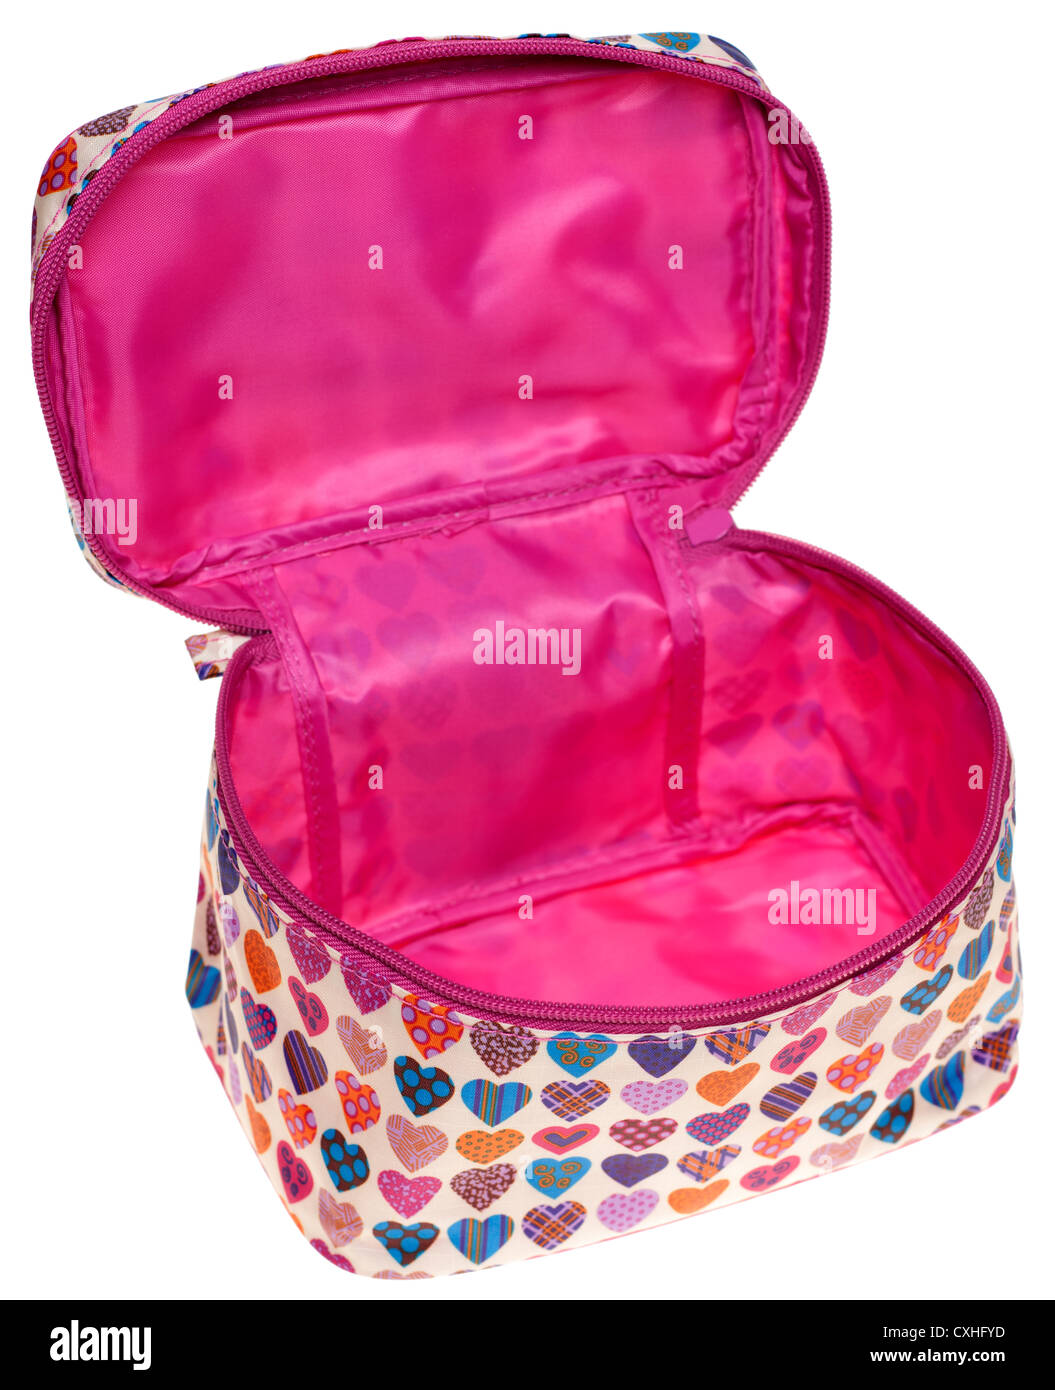 Plastic lined patterned pink vanity zipped bag Stock Photo